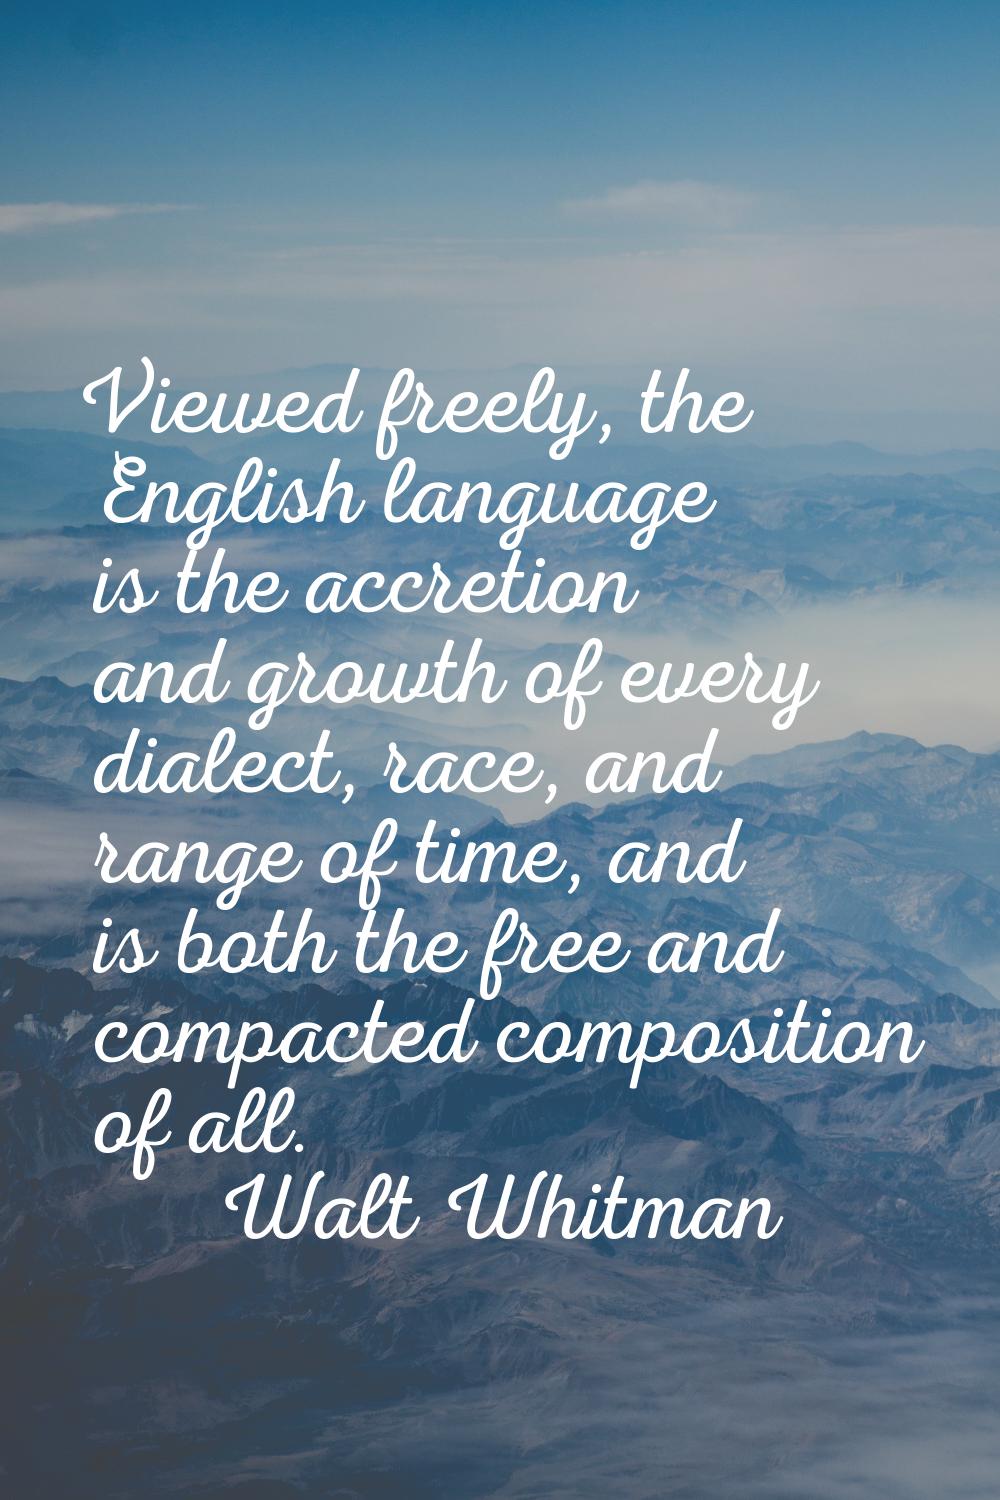 Viewed freely, the English language is the accretion and growth of every dialect, race, and range o